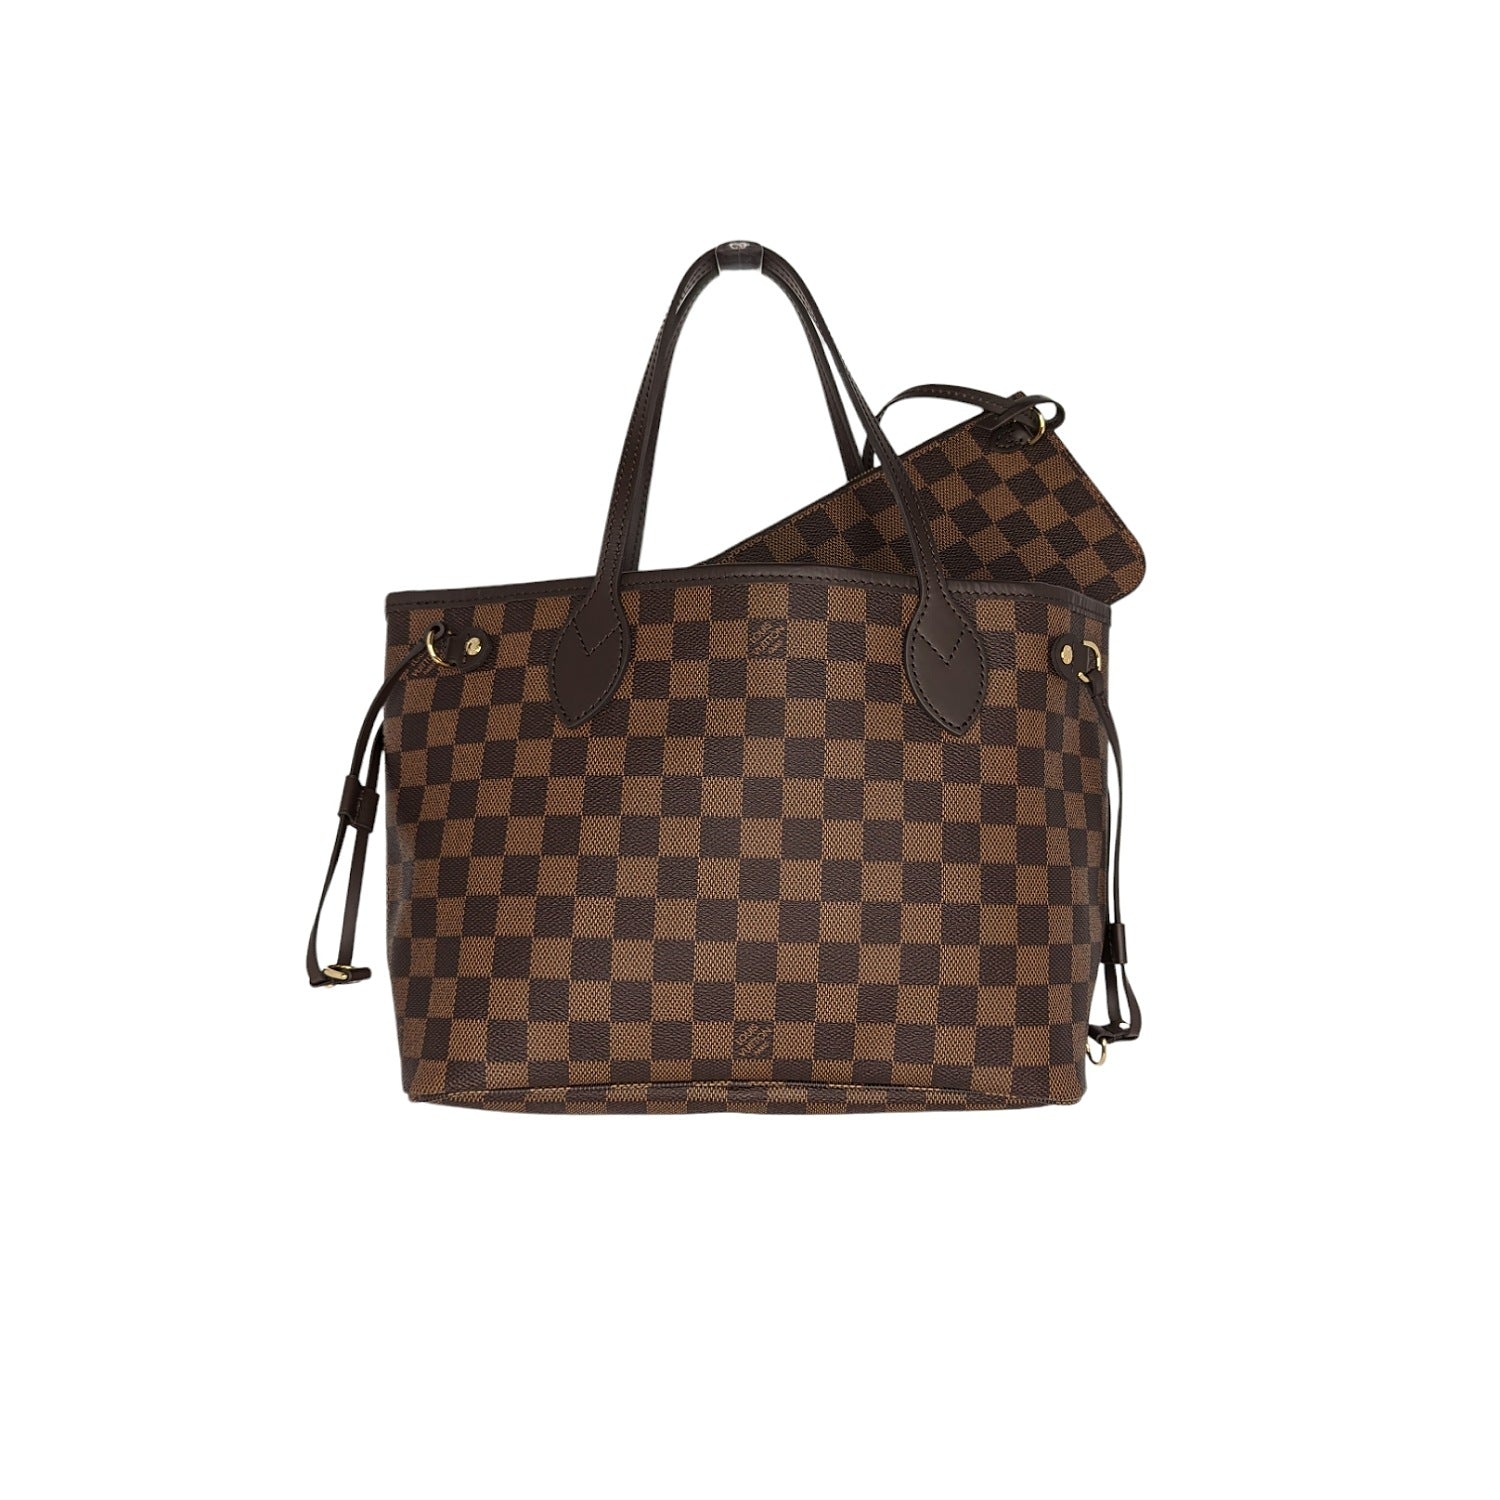 Louis Vuitton 2012 Pre-owned Damier Ebene Neverfull PM Tote Bag - Brown